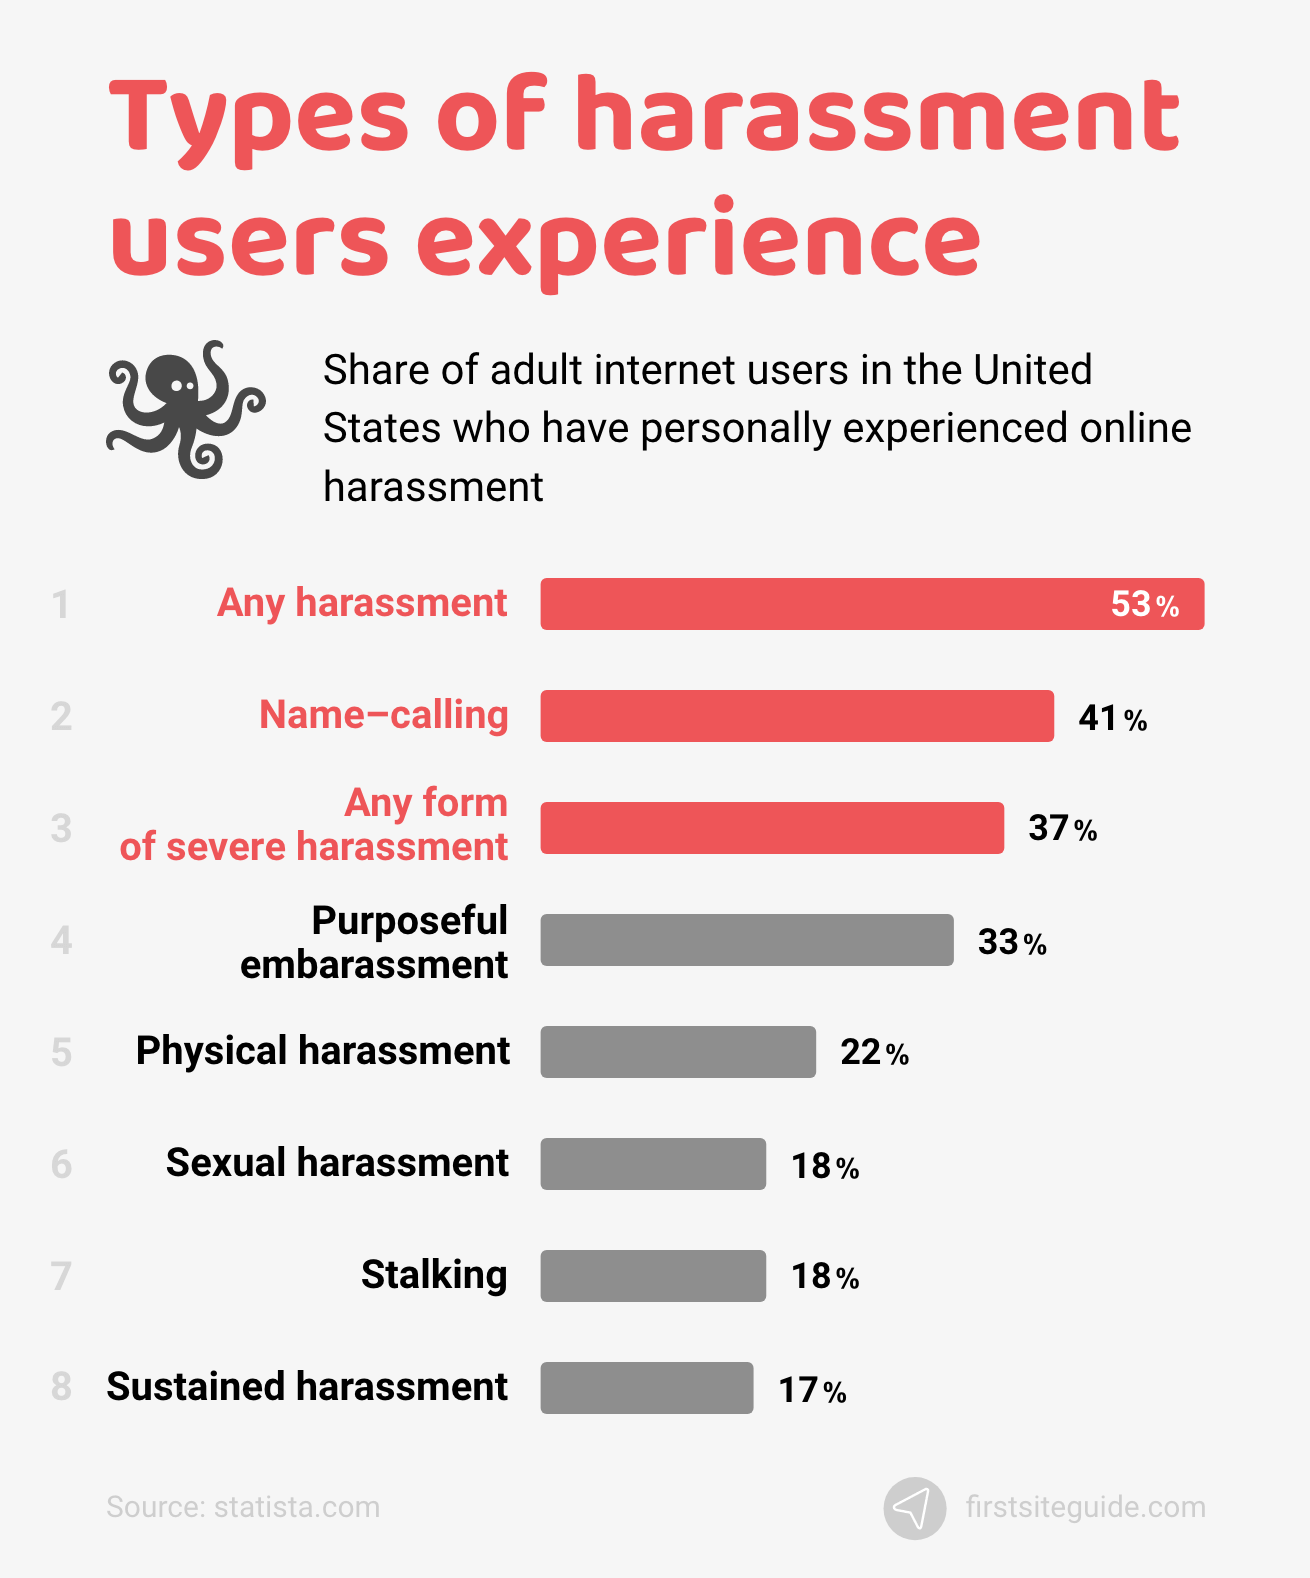 Types of harassment users experience